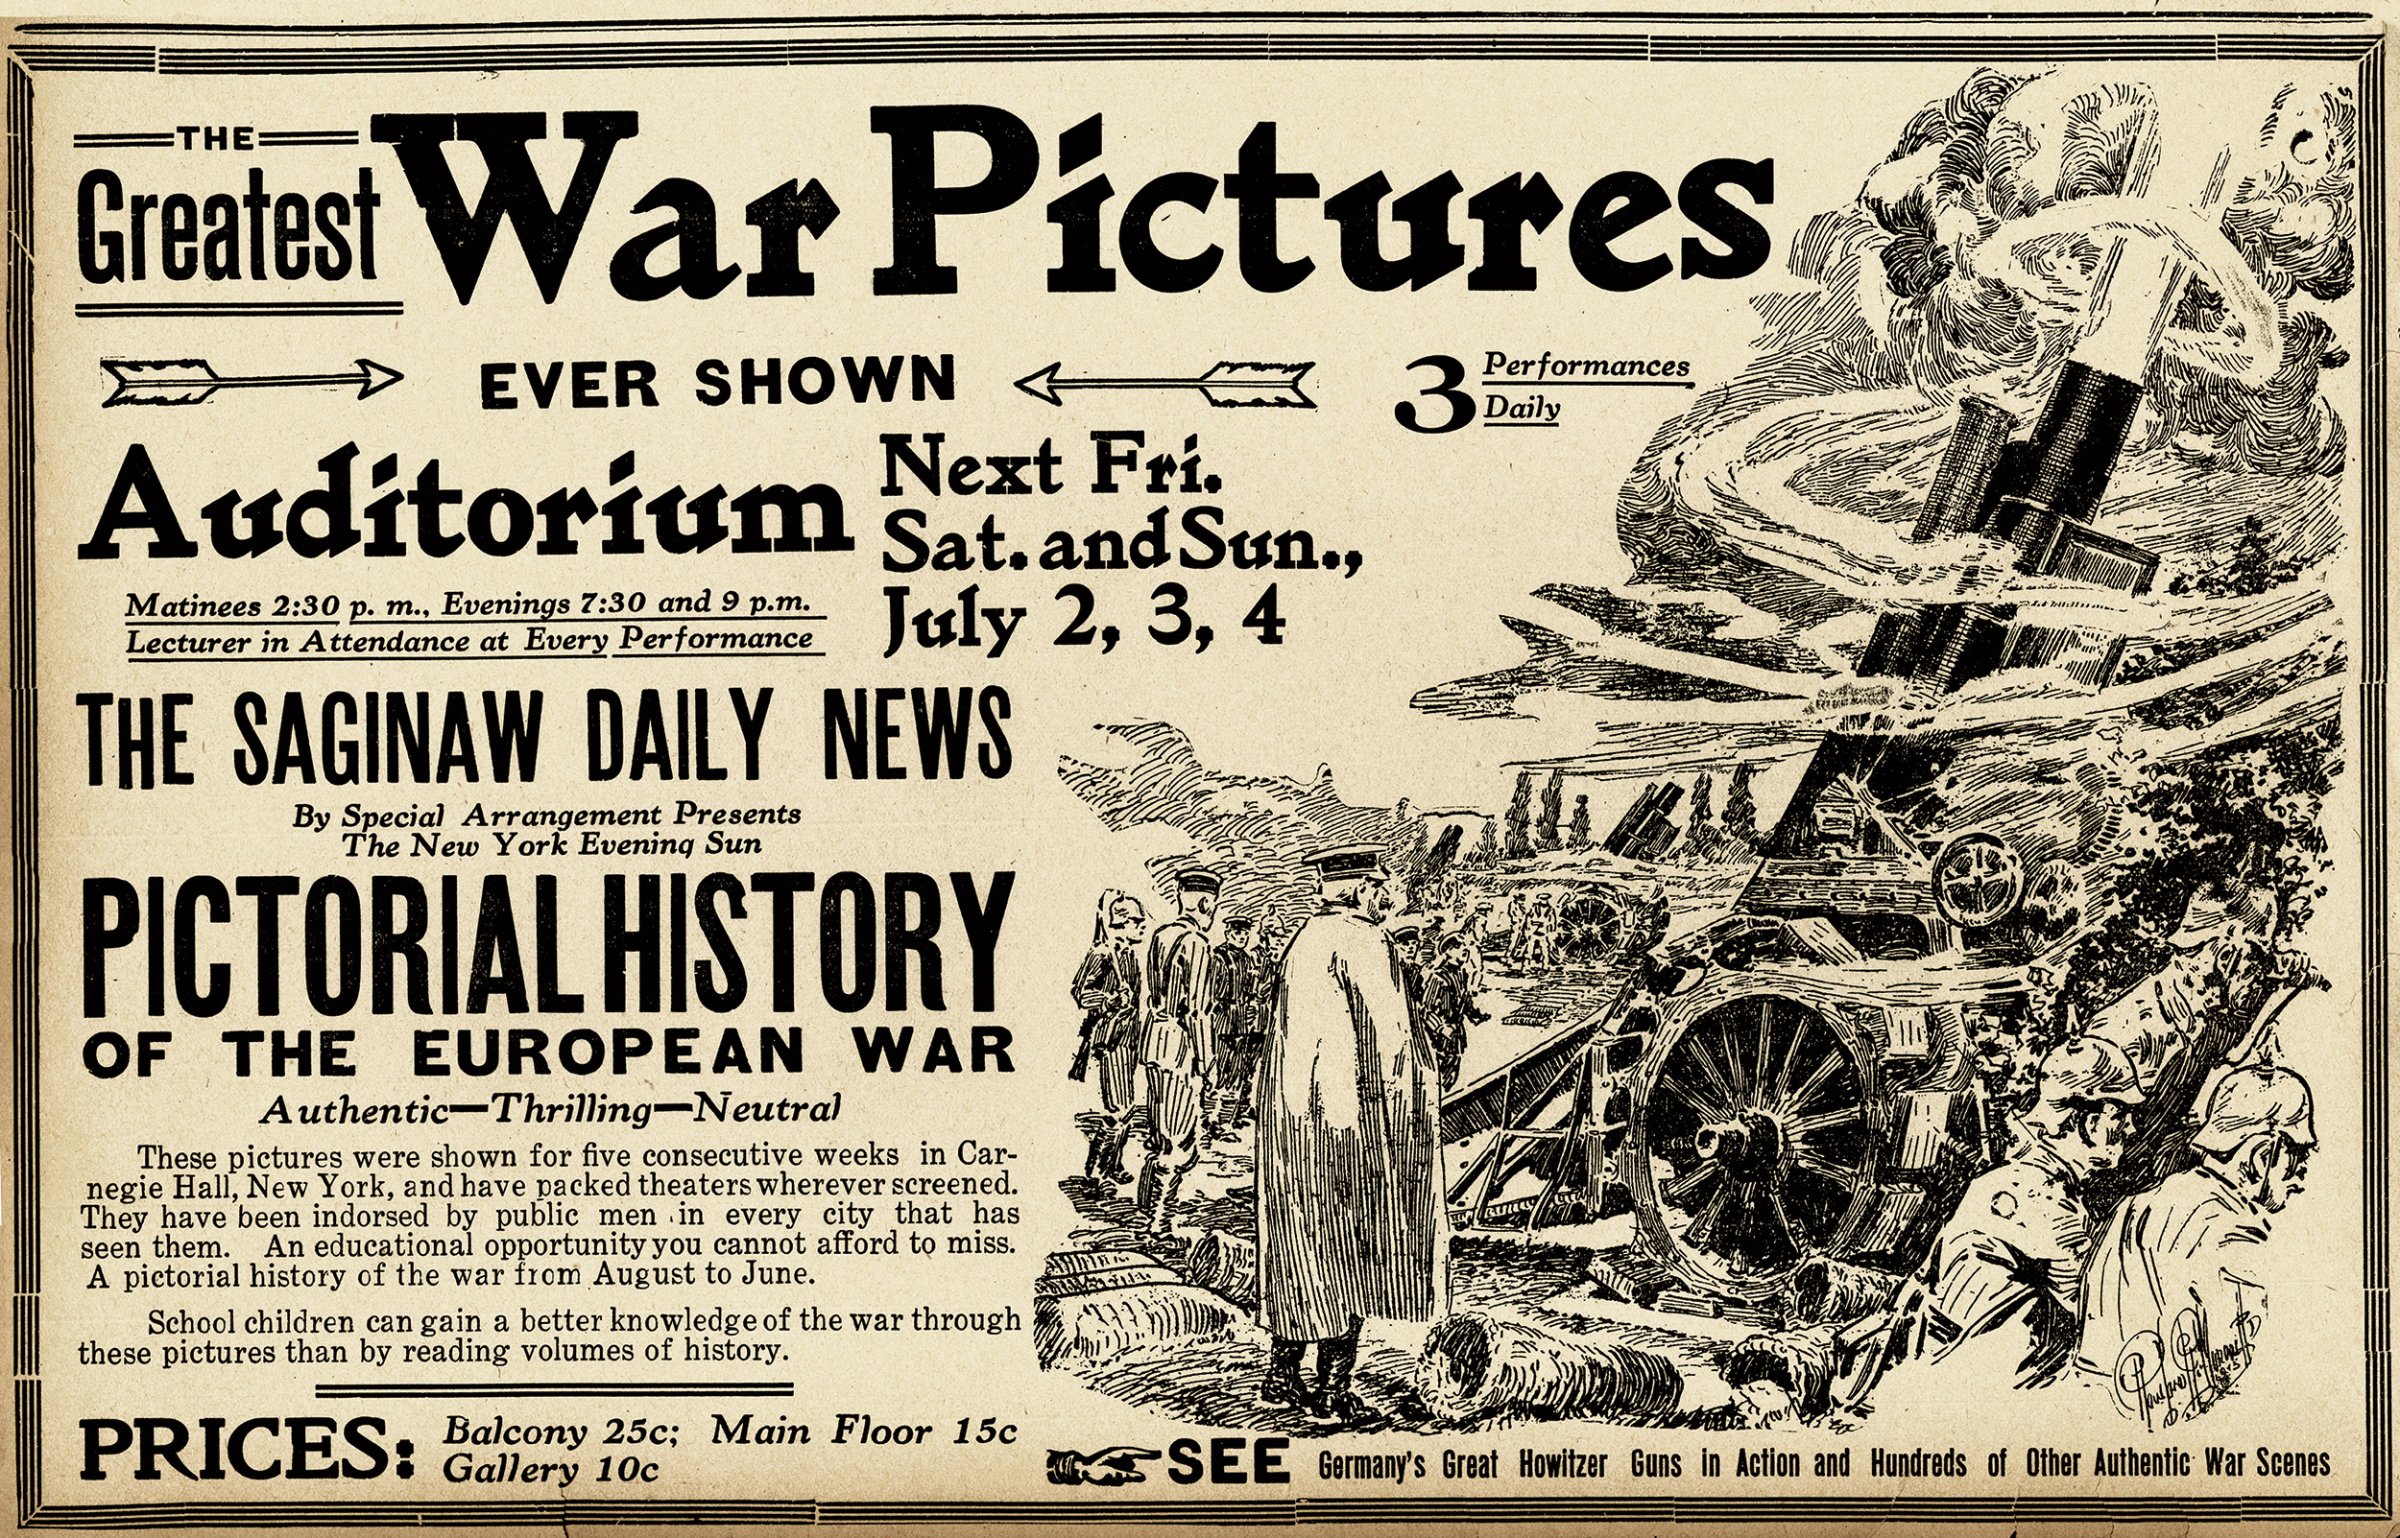 The Greatest War Pictures newspaper advertisement, 1918.